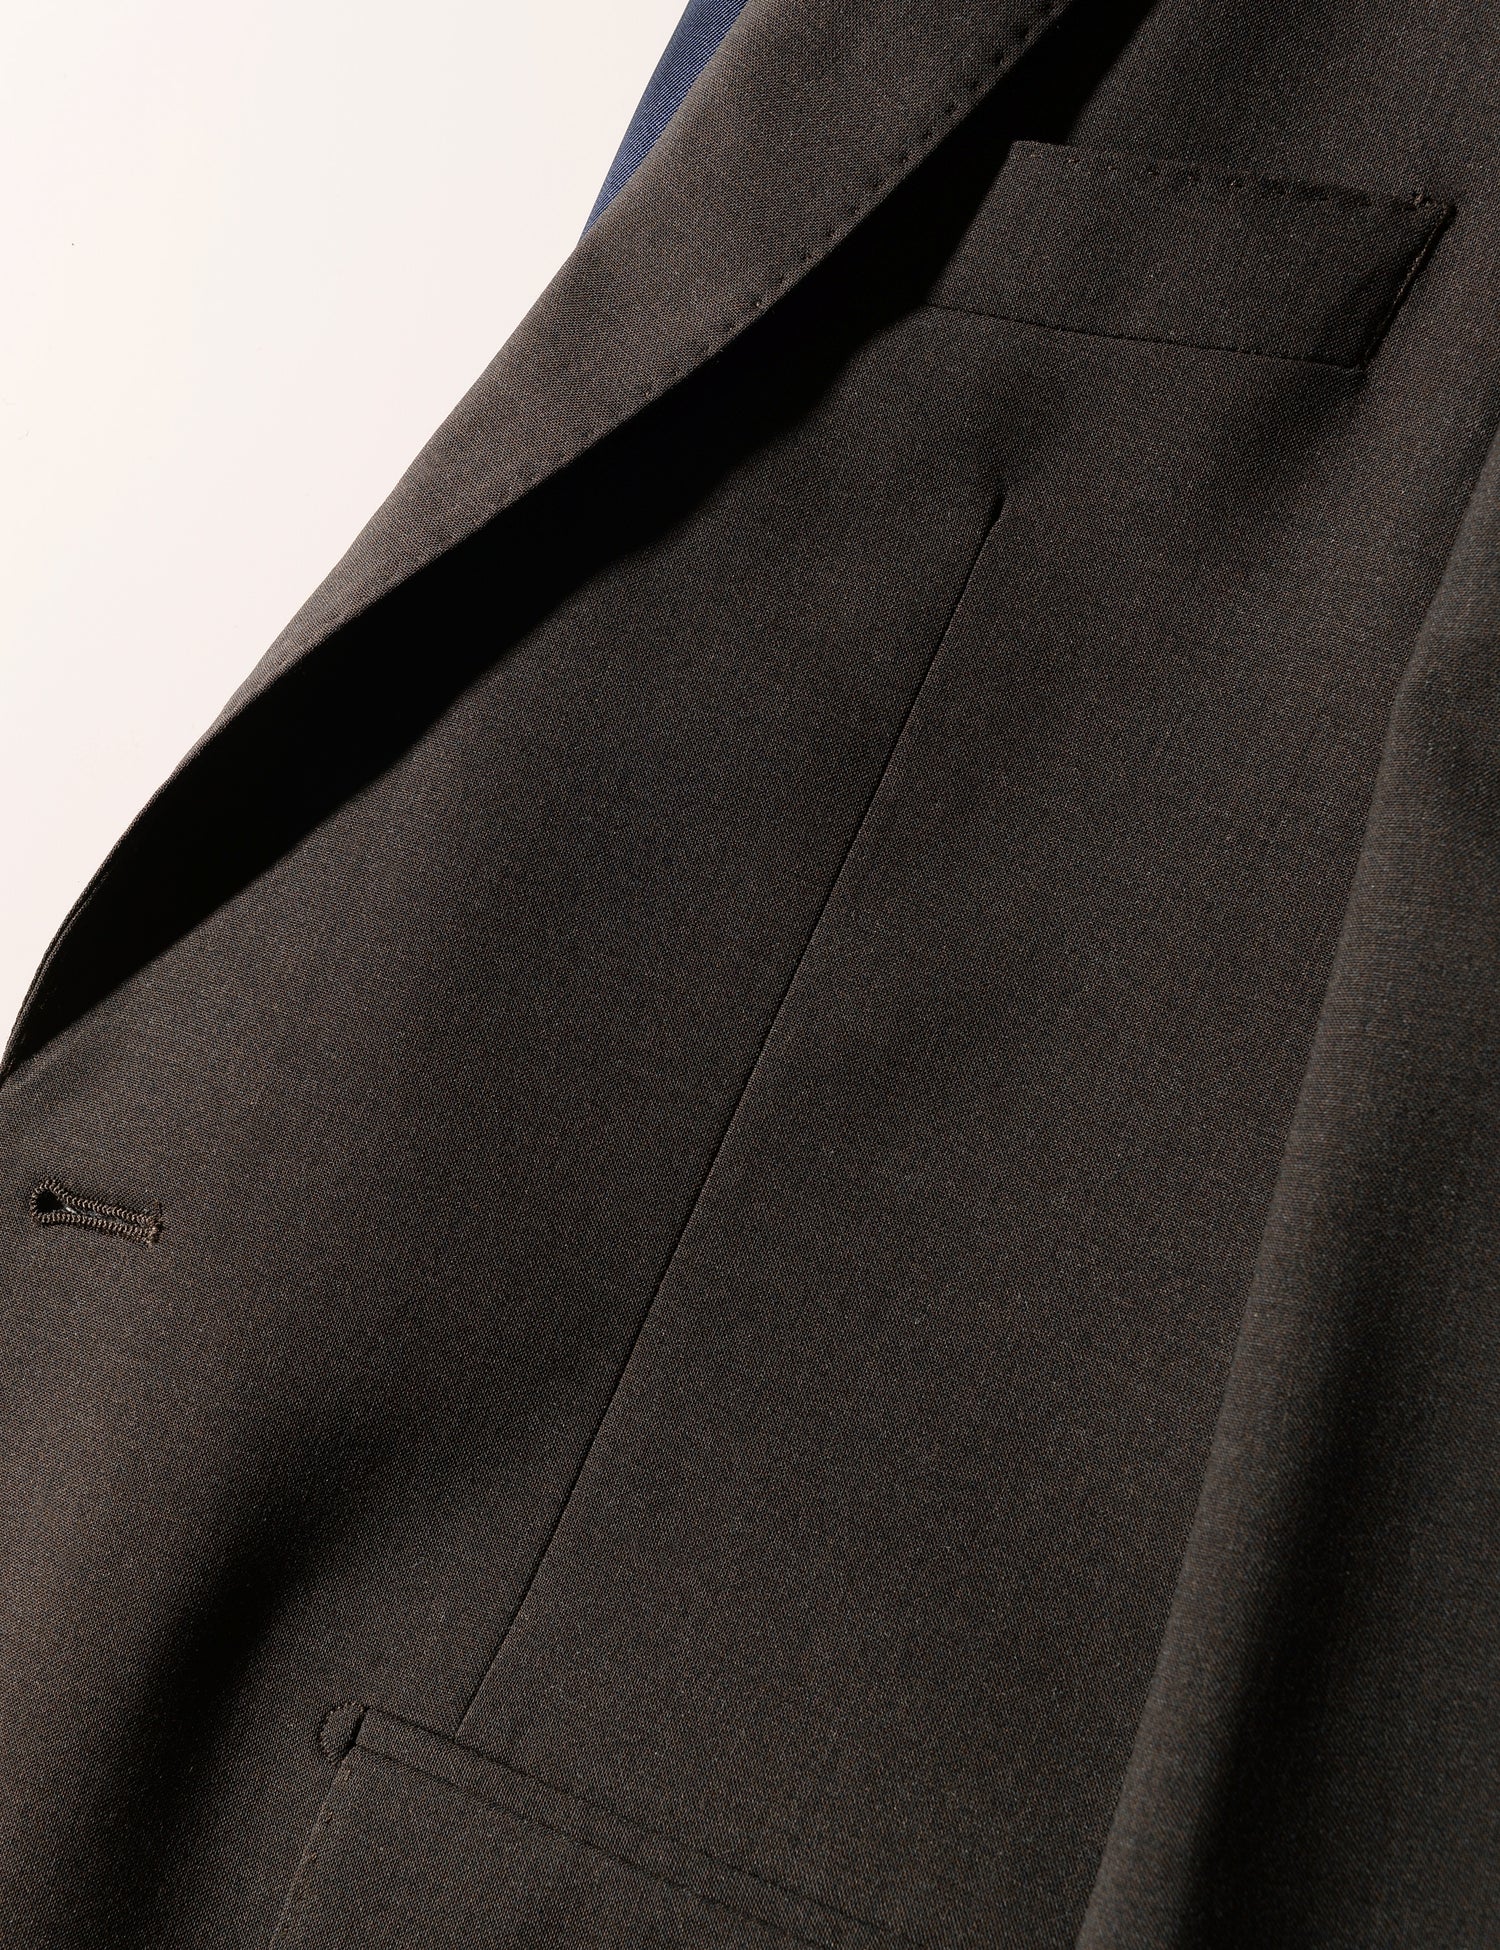 Detail shot of Brooklyn Tailors BKT50 Tailored Jacket in Heathered Plainweave - Charred Ember showing lapel, chest, and pocket